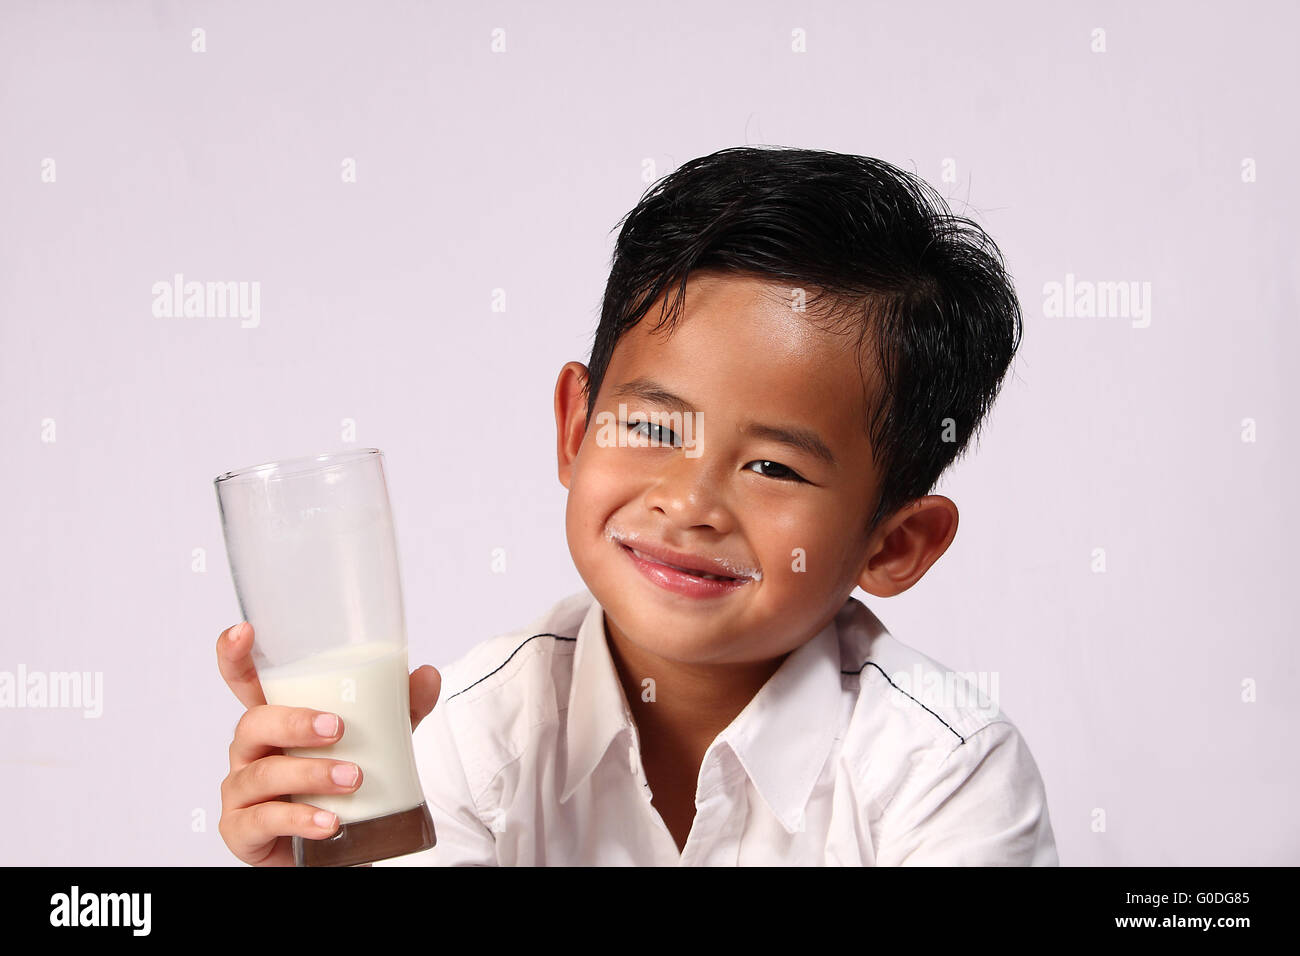 Happy and smiling Asian boy showing a glass of milk Stock Photo